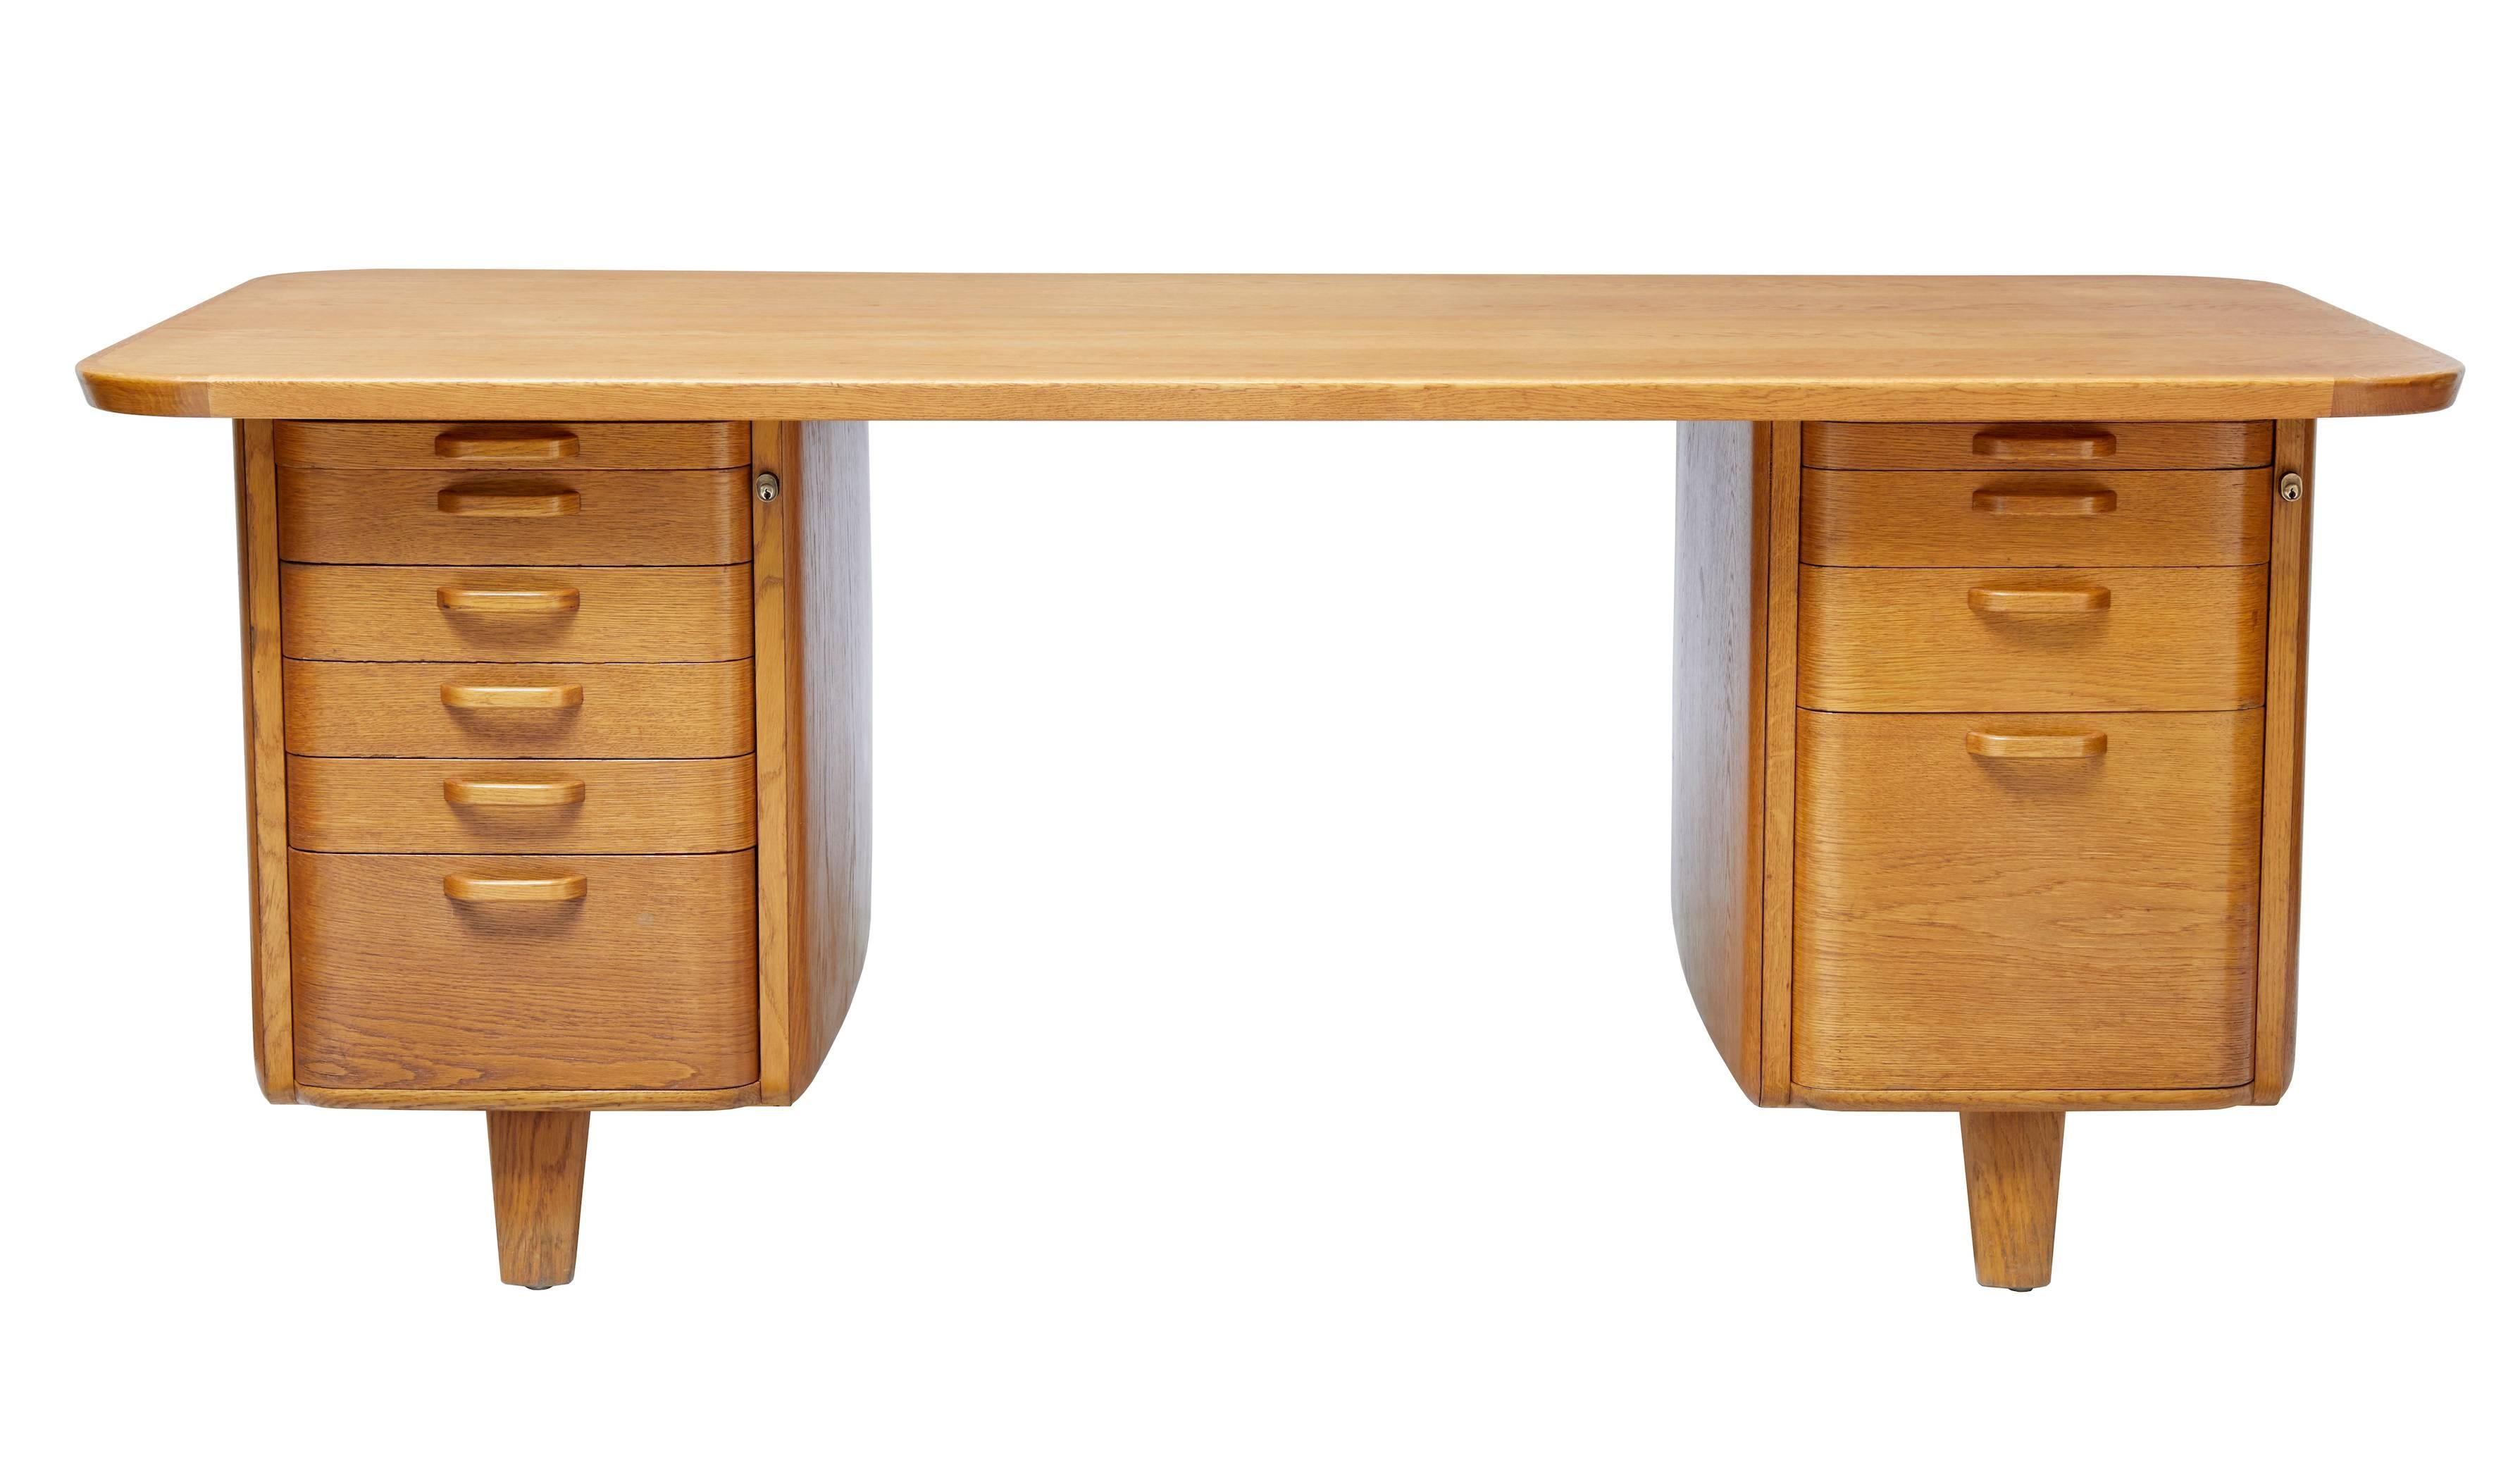 Fine quality late deco period desk, circa 1940.

Produced by Atvidaberg and designed by Gunnar Ericsson.

Rich golden oak woodwork used on this one-piece desk. Shaped pedestals with six graduating drawers to the left and four drawers to the